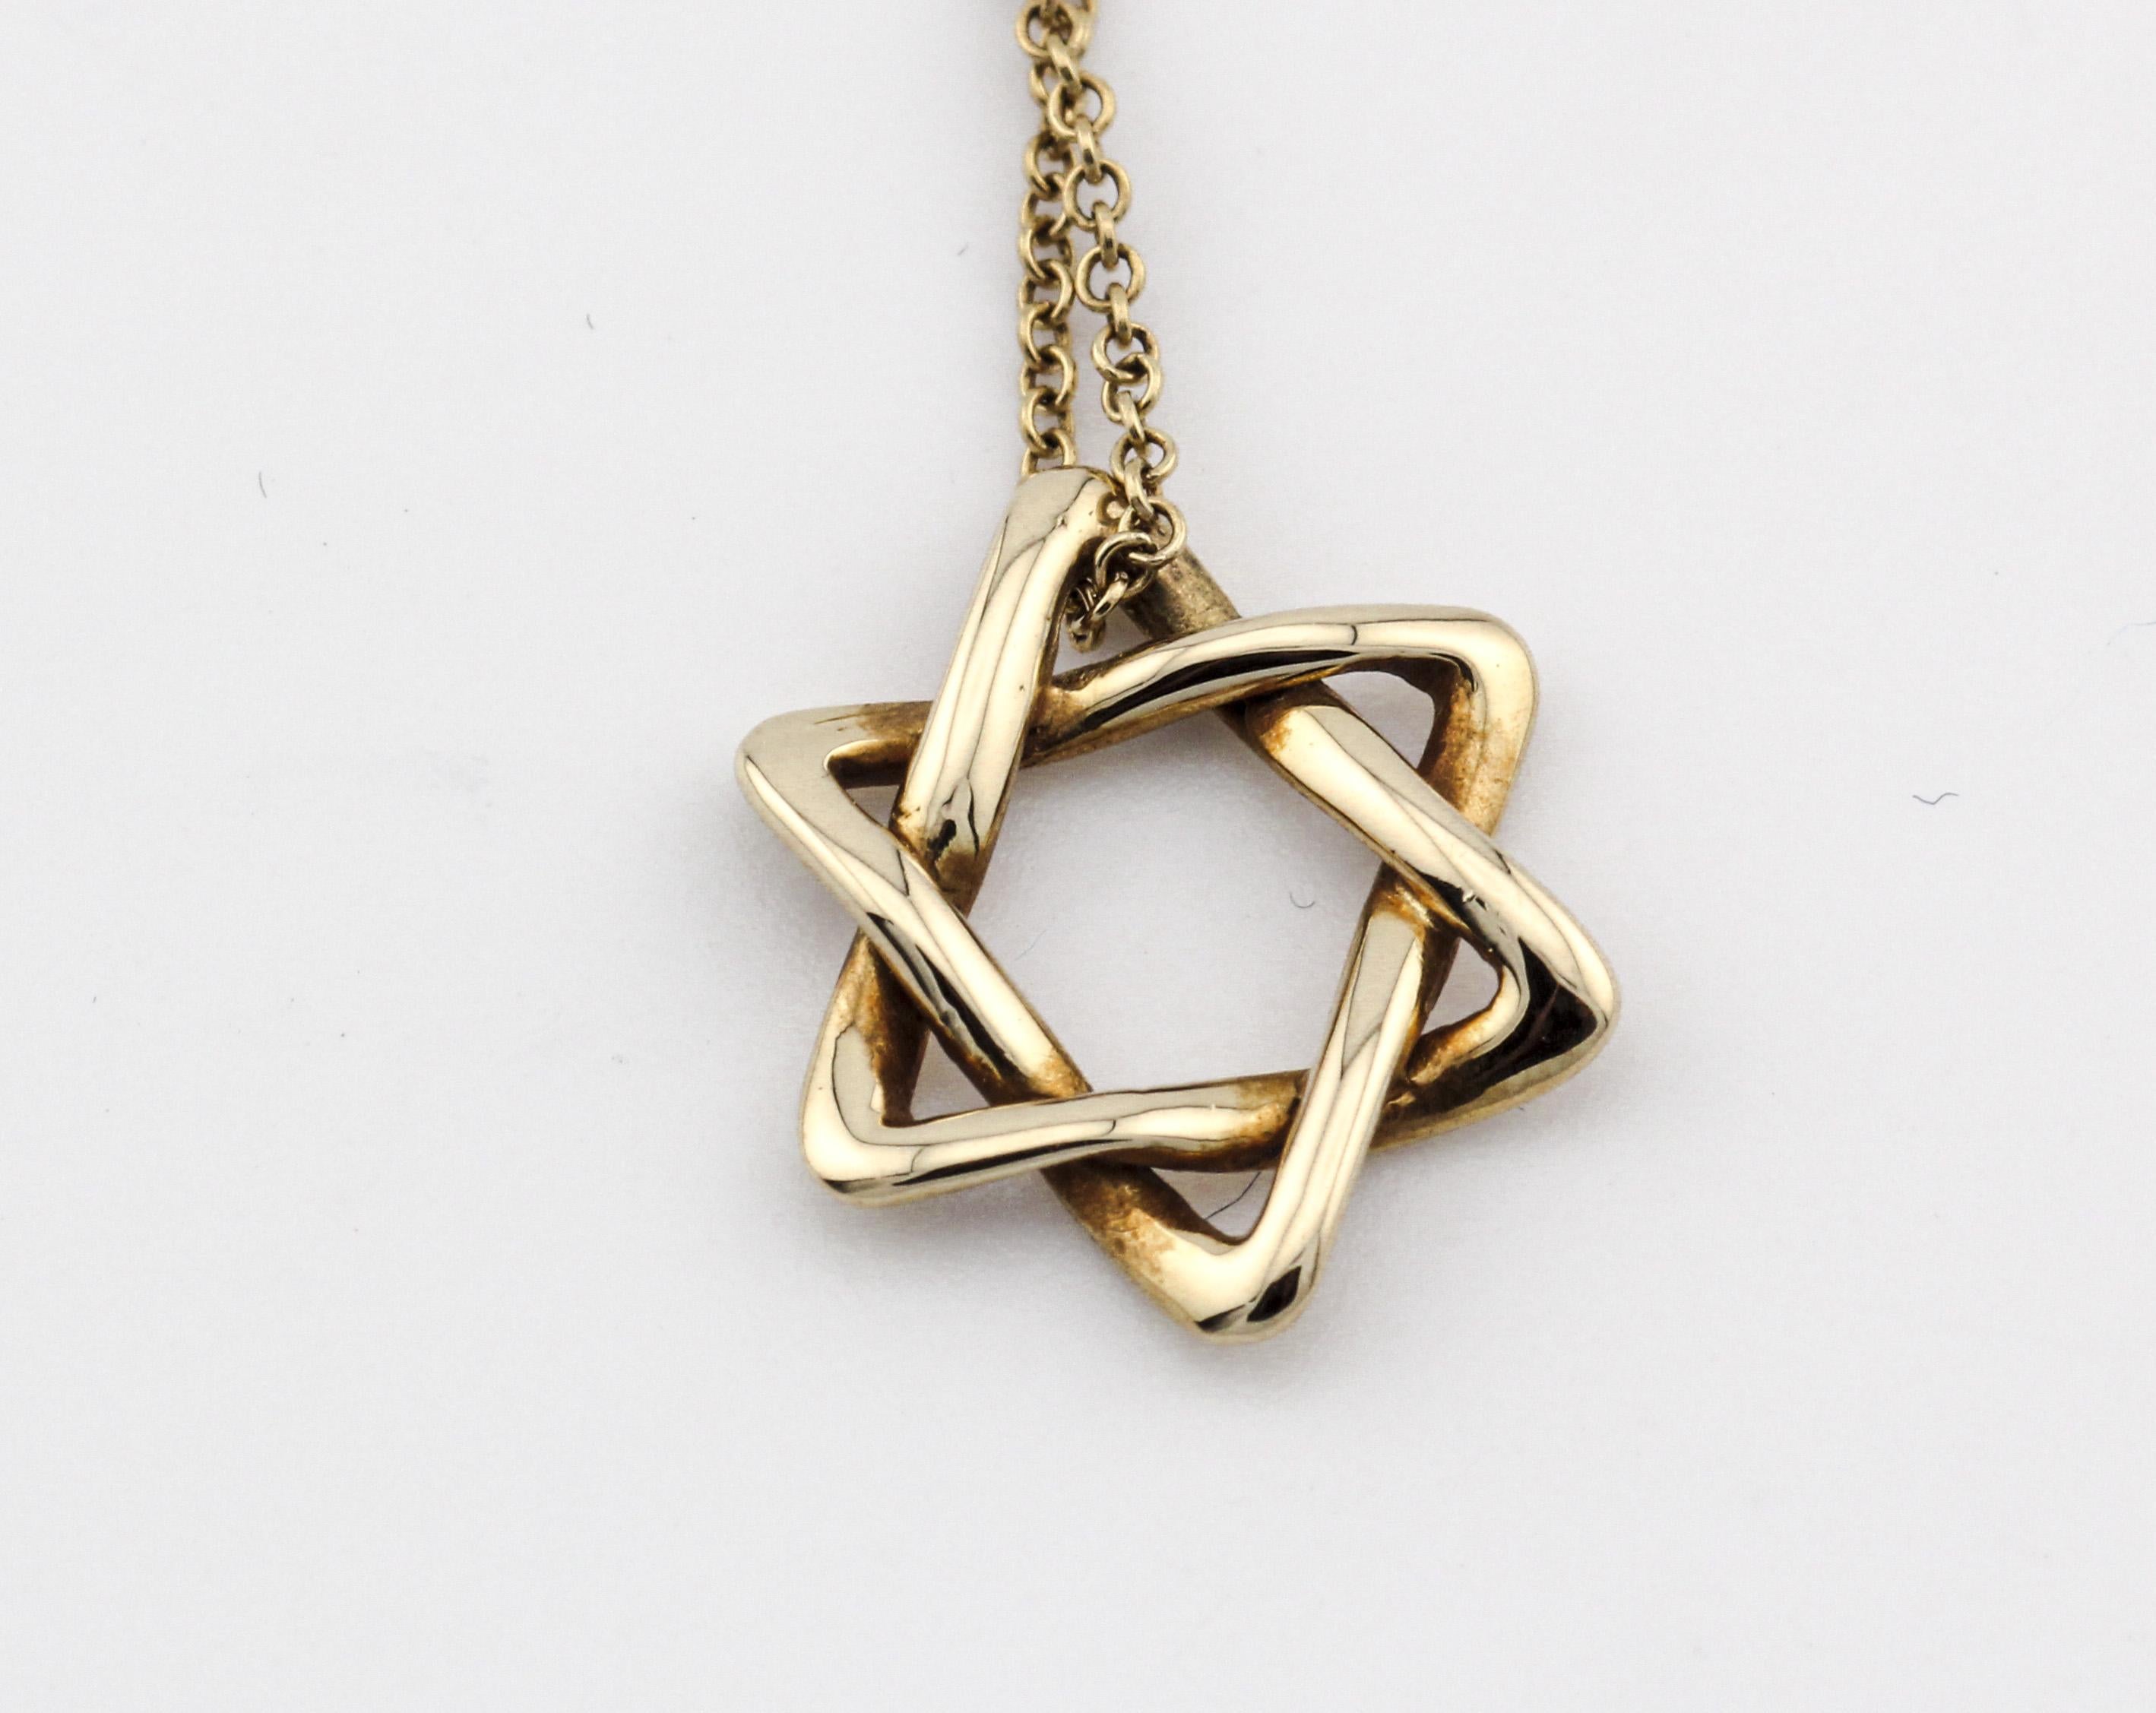 Tiffany & Co. Elsa Peretti 18K Yellow Gold 12 mm Star of David Pendant Necklace In Good Condition For Sale In Bellmore, NY